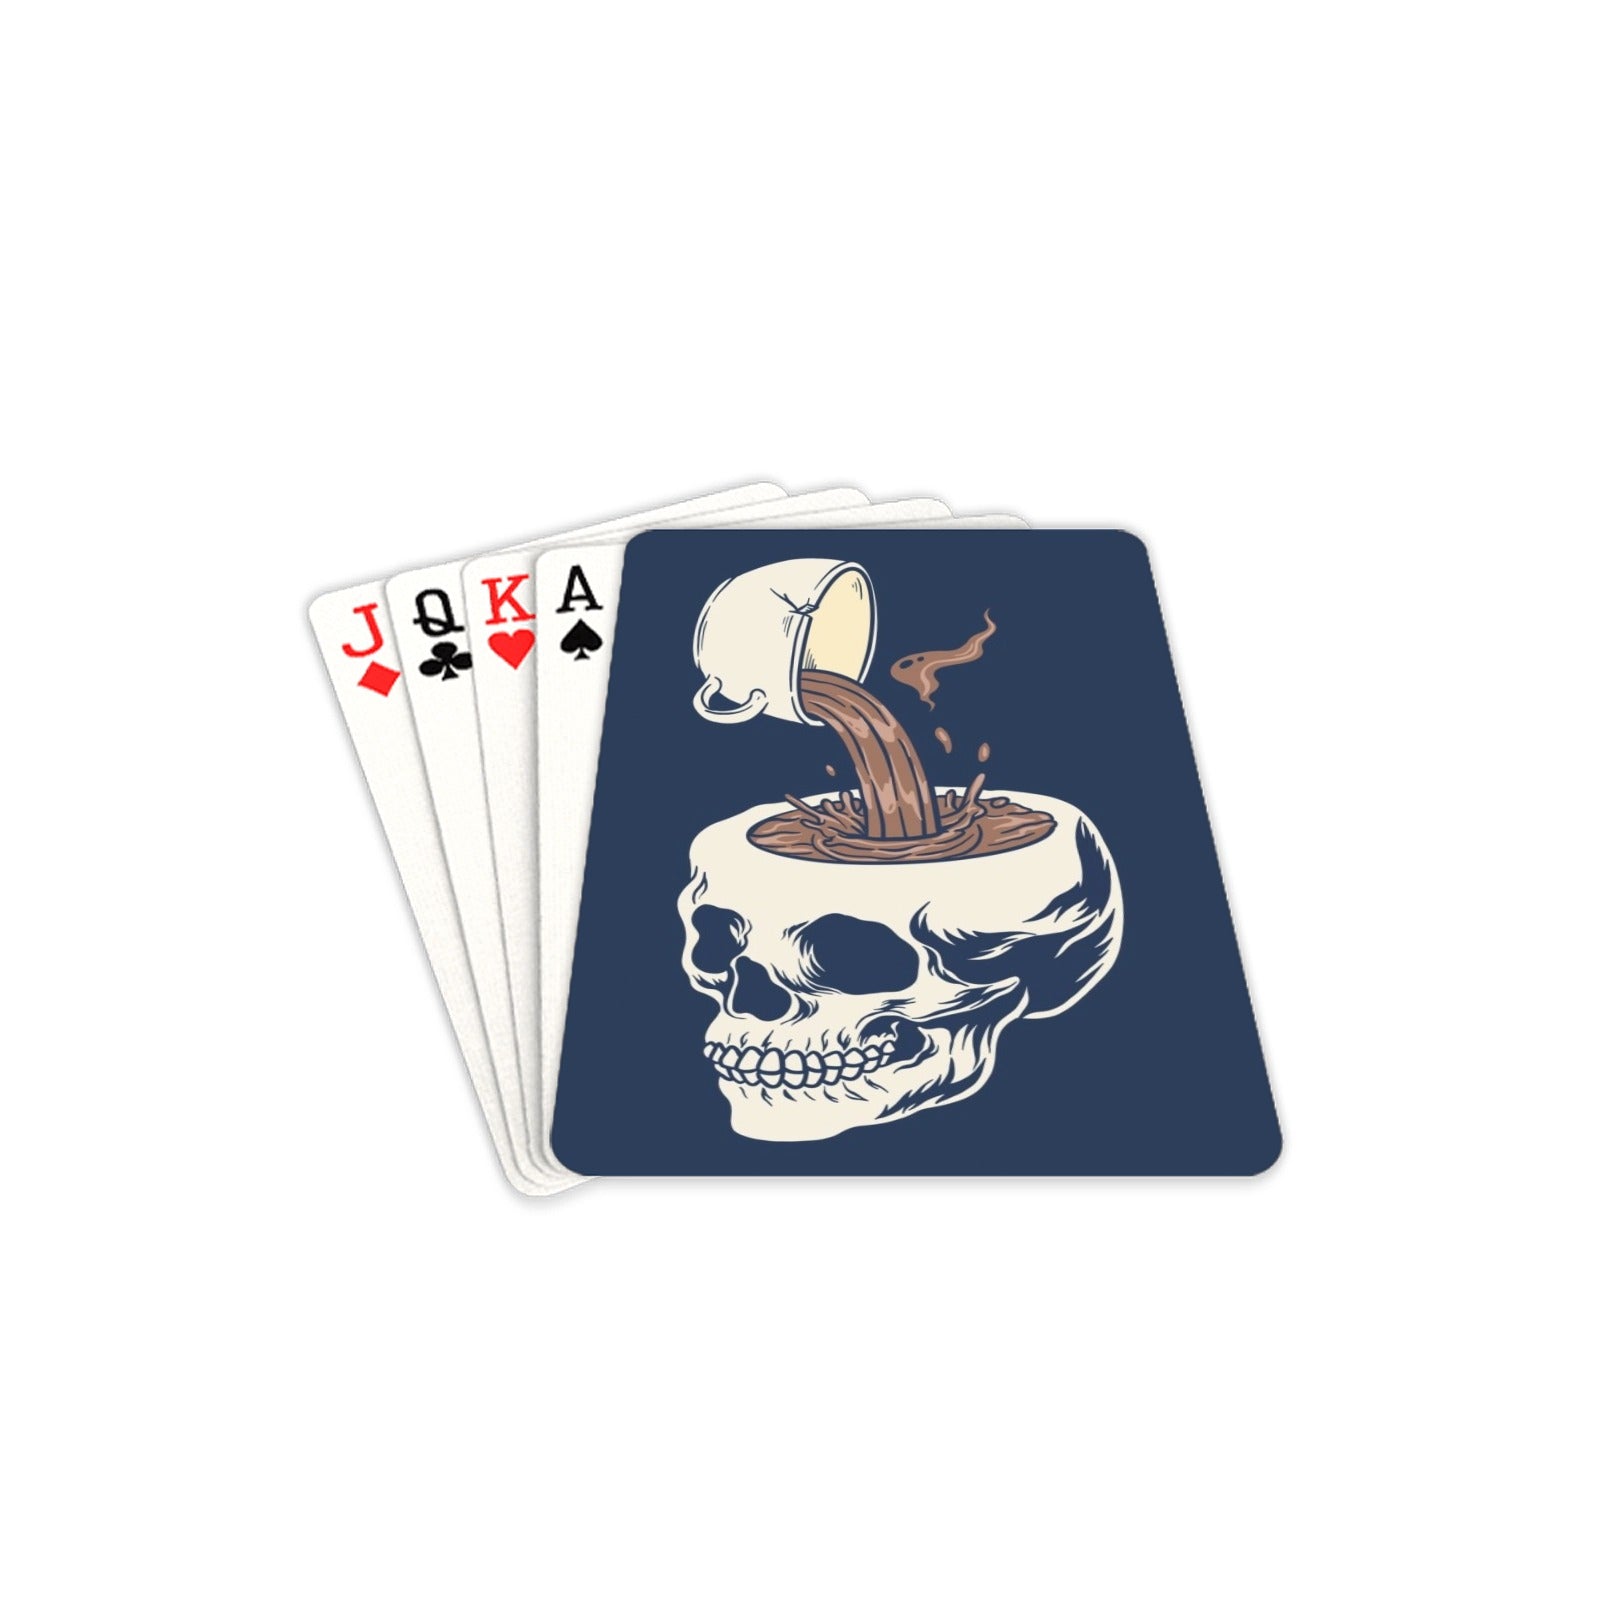 Skull Coffee - Playing Cards 2.5"x3.5" Playing Card 2.5"x3.5"